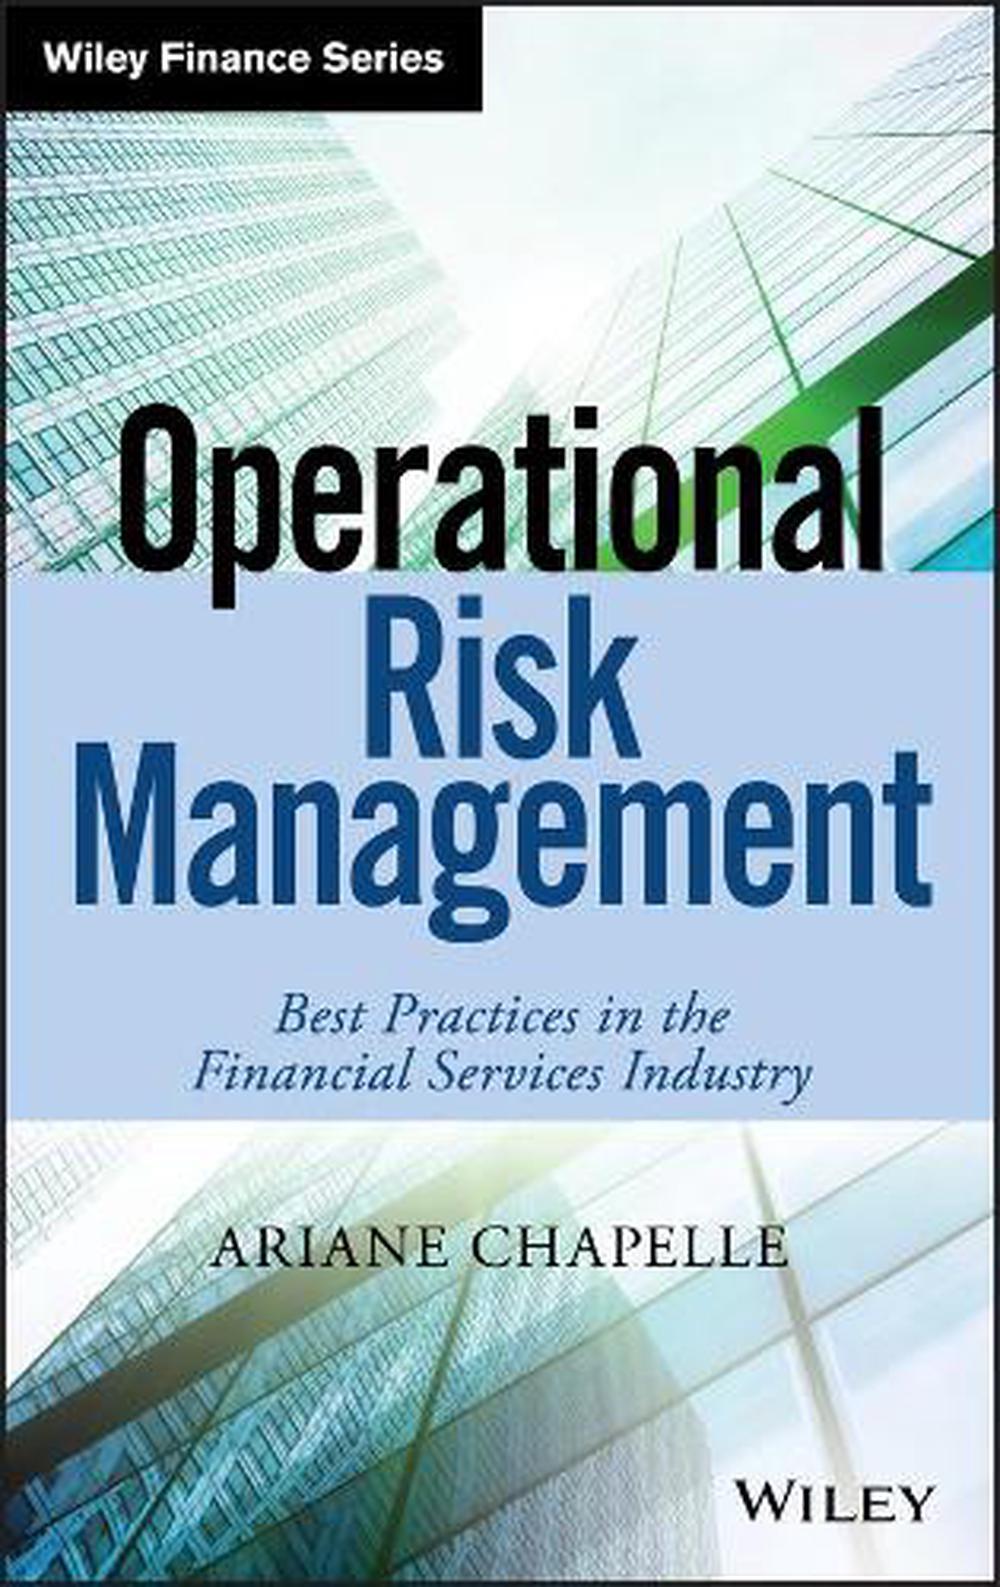 Operational Risk Management Best Practices in the Financial Services